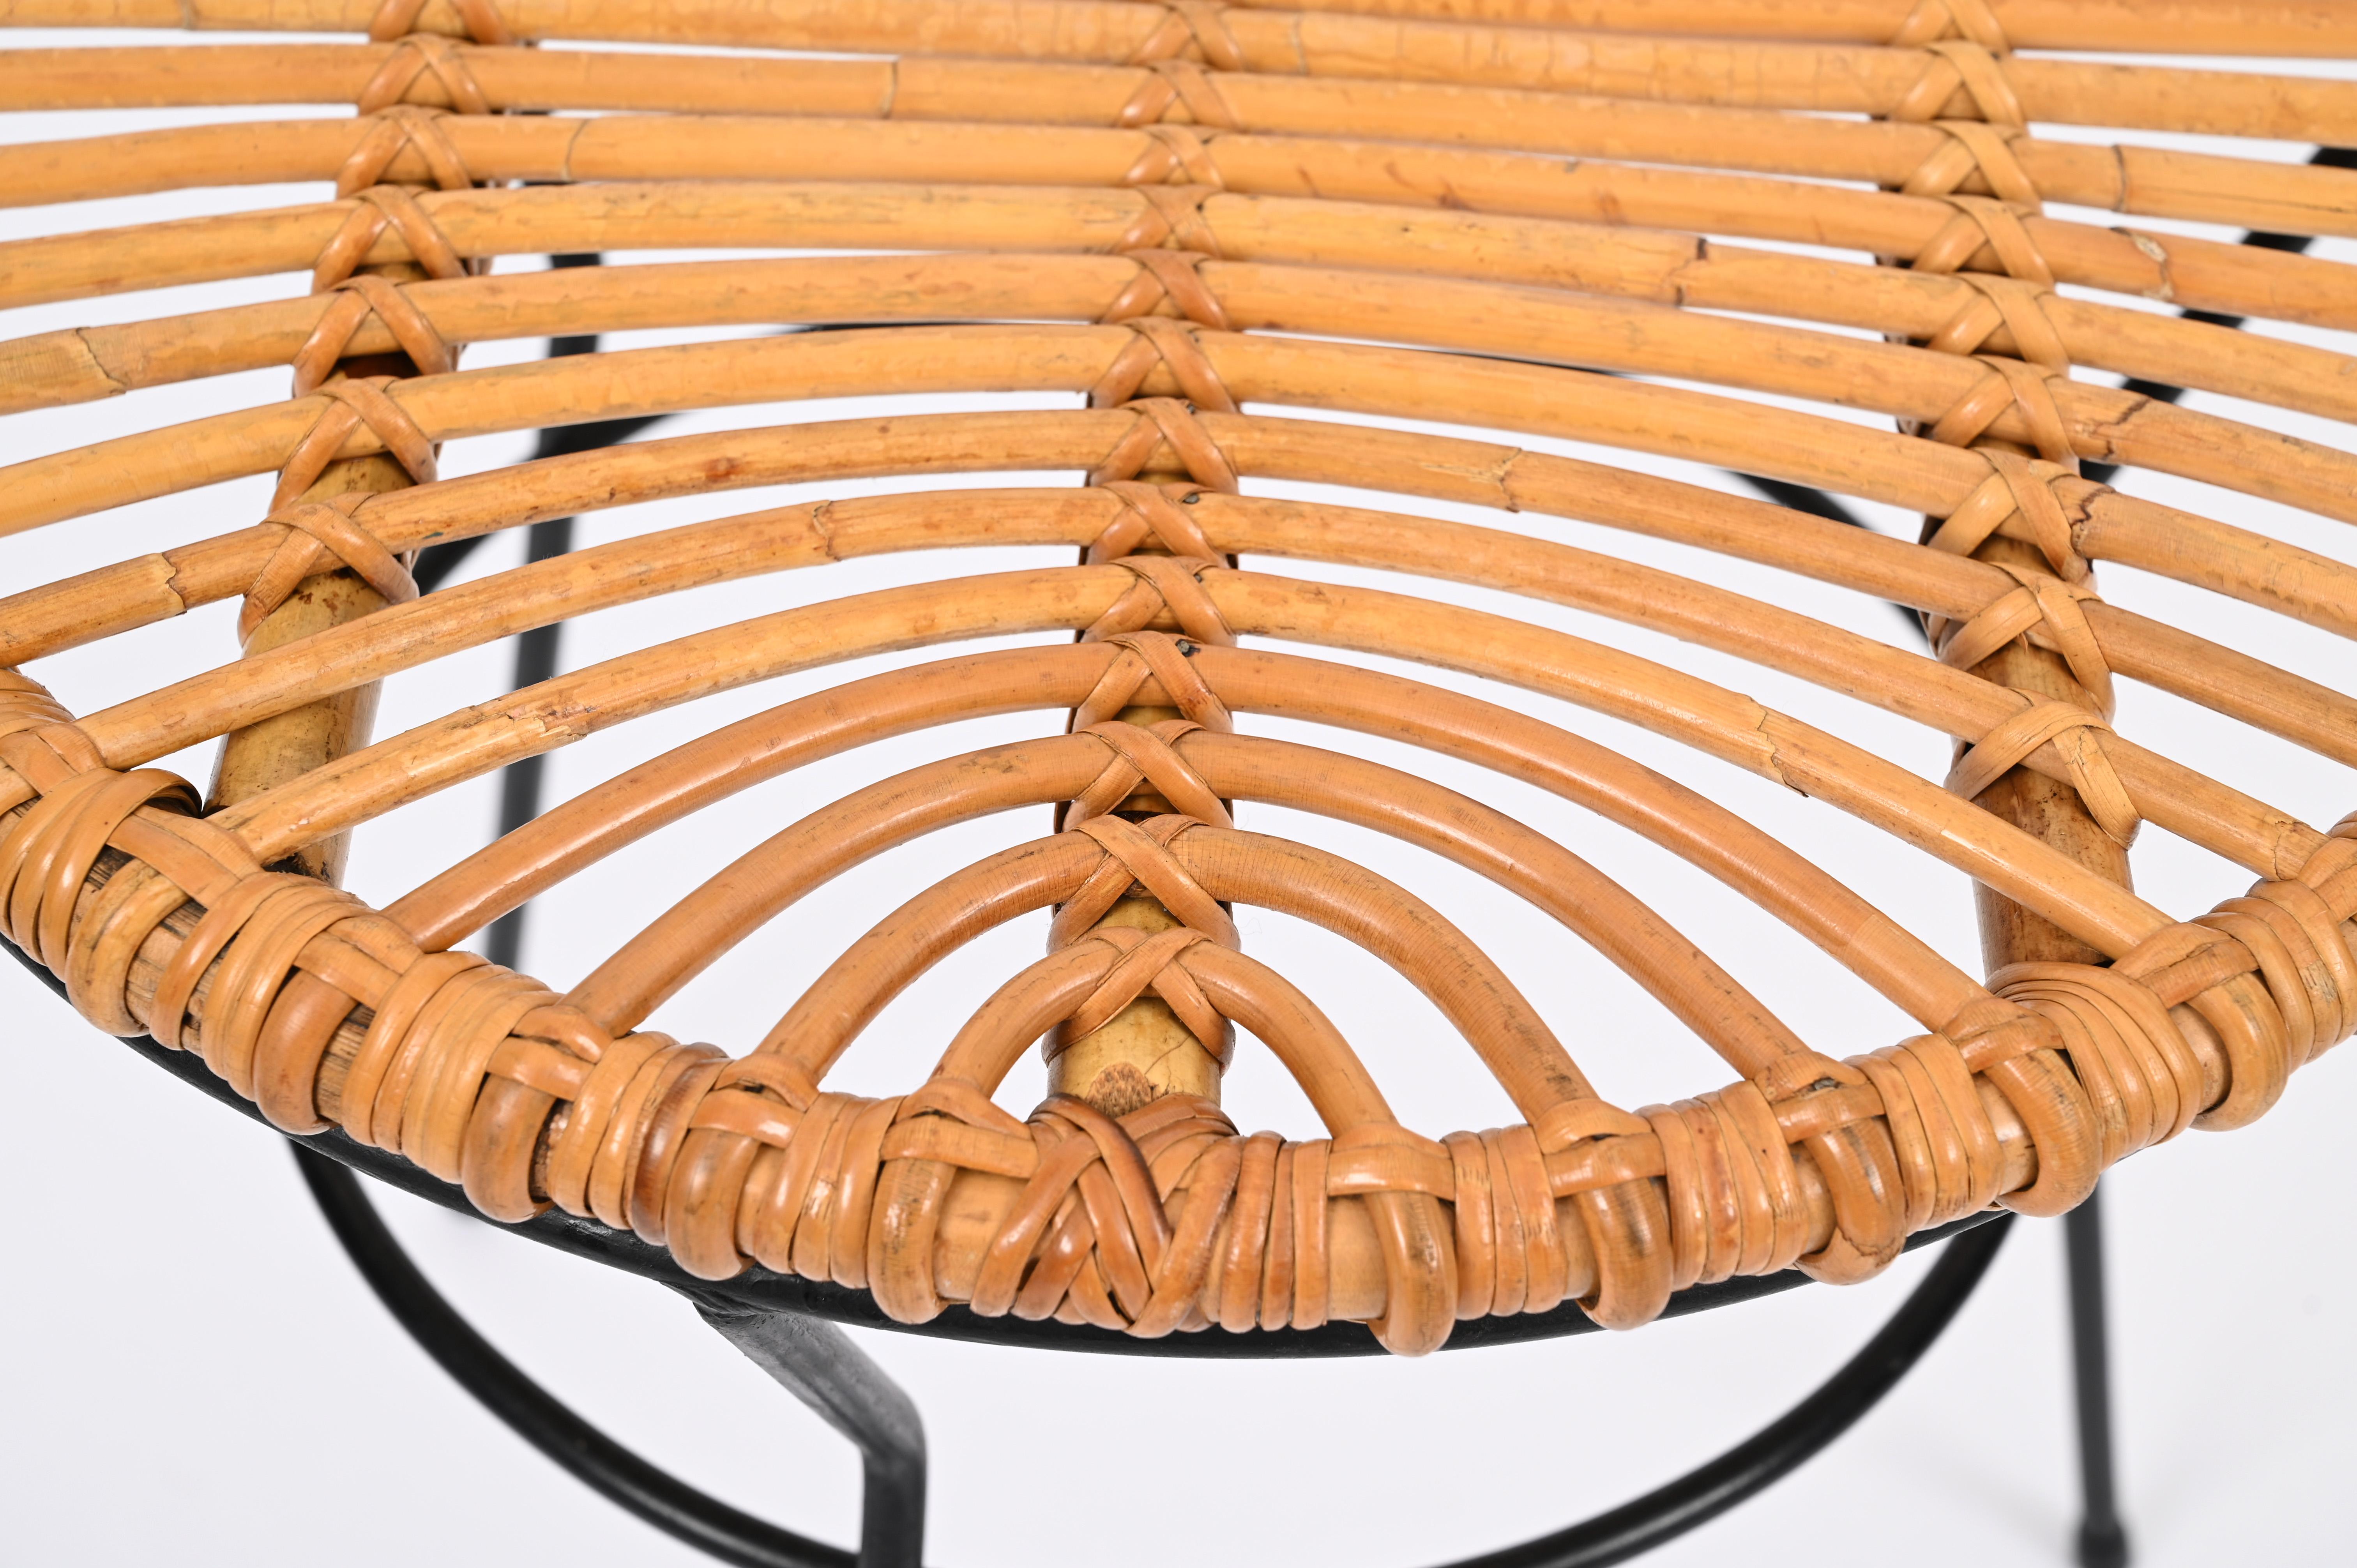 Hand-Crafted French Riviera Rattan, Wicker and Iron Coffee Table, Roberto Mango, Italy 1960s For Sale